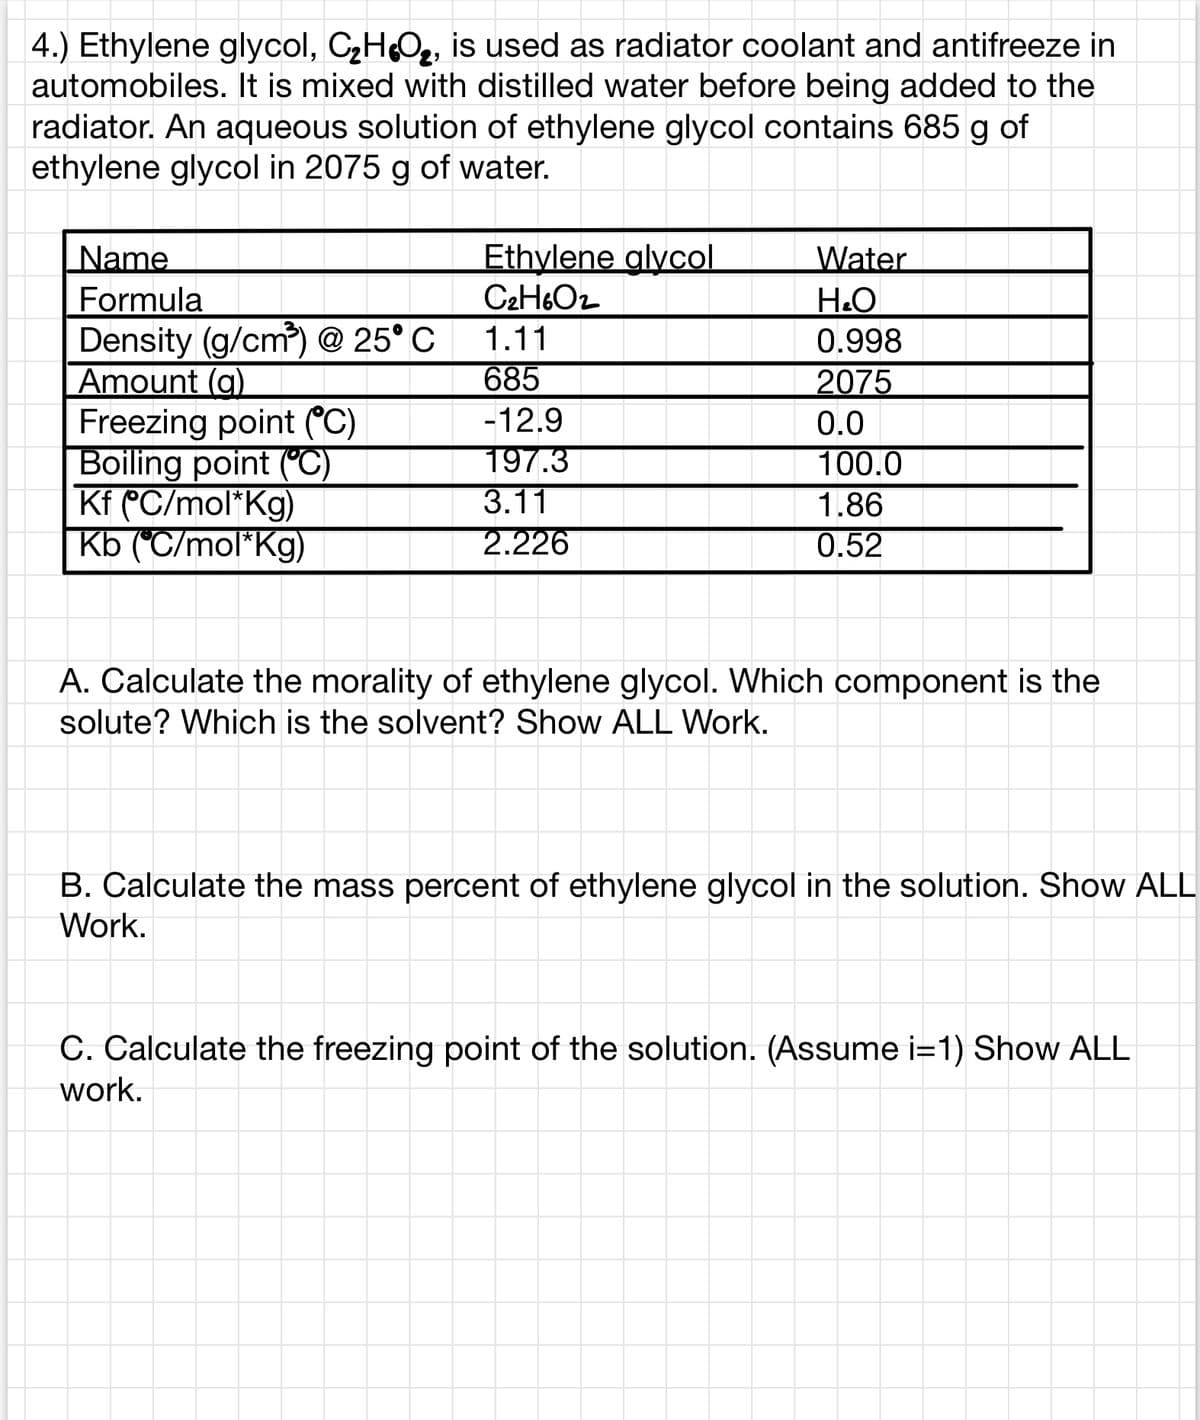 4.) Ethylene glycol, CHO2, is used as radiator coolant and antifreeze in
automobiles. It is mixed with distilled water before being added to the
radiator. An aqueous solution of ethylene glycol contains 685 g of
ethylene glycol in 2075 g of water.
Name
Ethylene glycol
C2H6O2
Water
Formula
Н.О
Density (g/cm) @ 25° C
Amount (g)
Freezing point (C)
Boiling point ("C)
Kf CC/mol*Kg)
Kb (°C/mol*Kg)
1.11
0.998
685
2075
-12.9
197.3
3.11
0.0
100.0
1.86
2.226
0.52
A. Calculate the morality of ethylene glycol. Which component is the
solute? Which is the solvent? Show ALL Work.
B. Calculate the mass percent of ethylene glycol in the solution. Show ALL
Work.
C. Calculate the freezing point of the solution. (Assume i=1) Show ALL
work.
